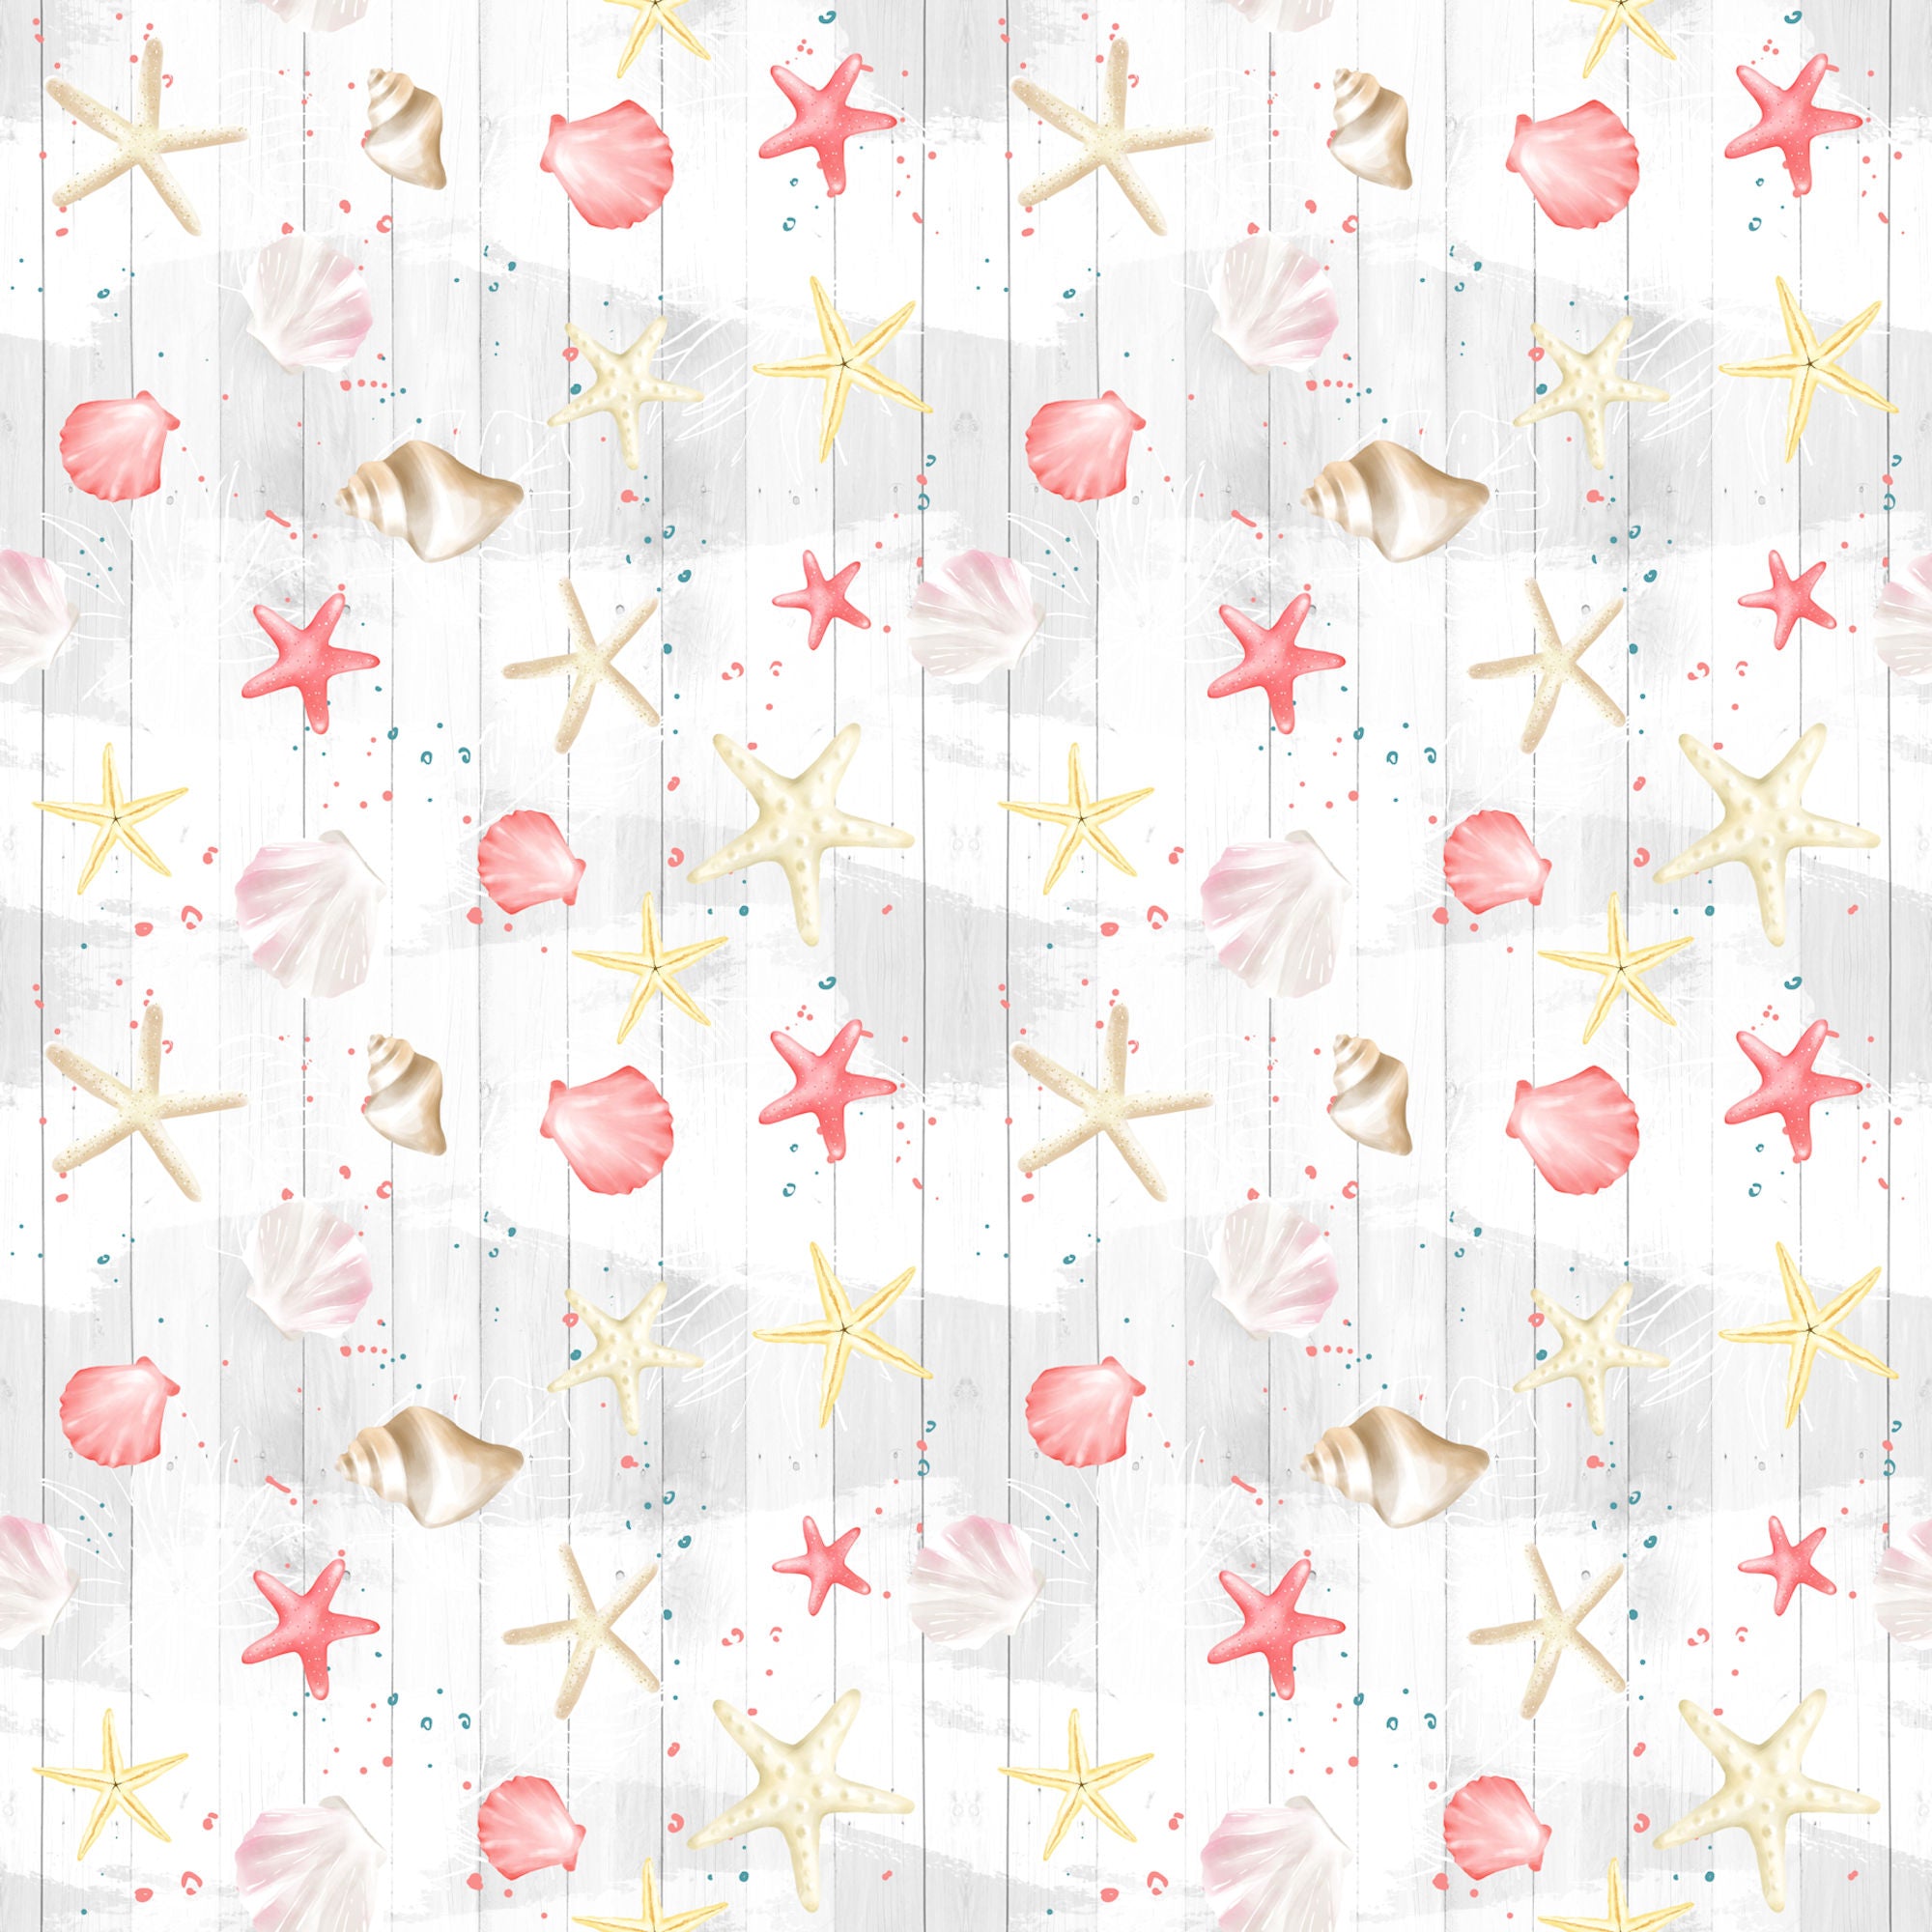 Nautical Summer Collection Seashell Pier 12 x 12 Double-Sided Scrapbook Paper by SSC Designs